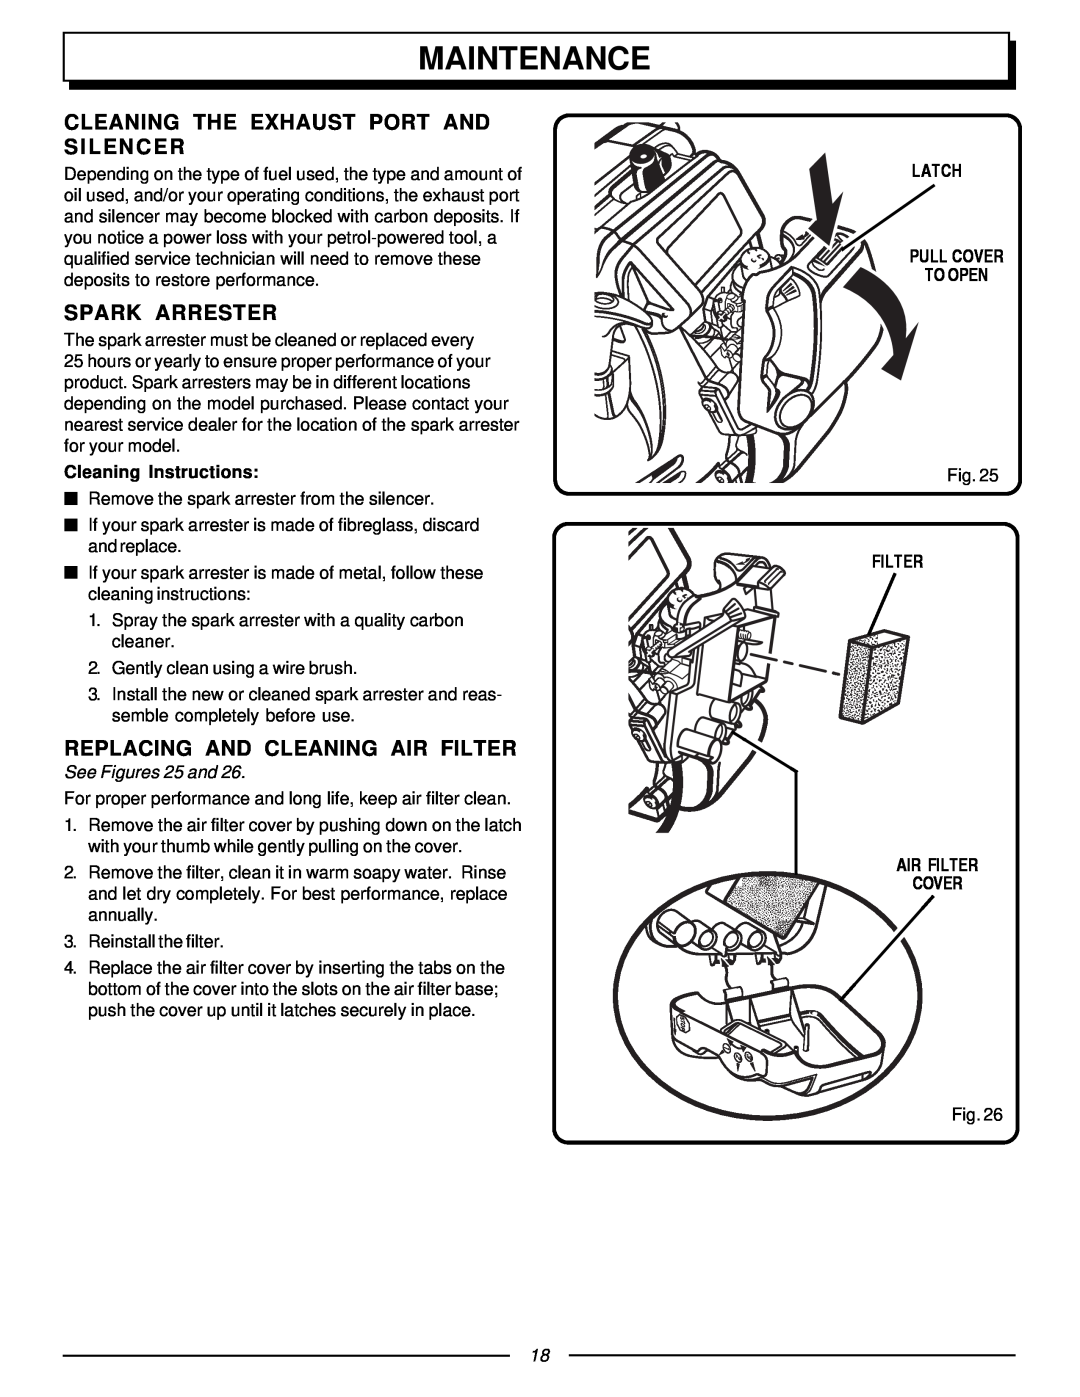 Homelite UT70127 Cleaning The Exhaust Port And Silencer, Spark Arrester, Replacing And Cleaning Air Filter, Maintenance 